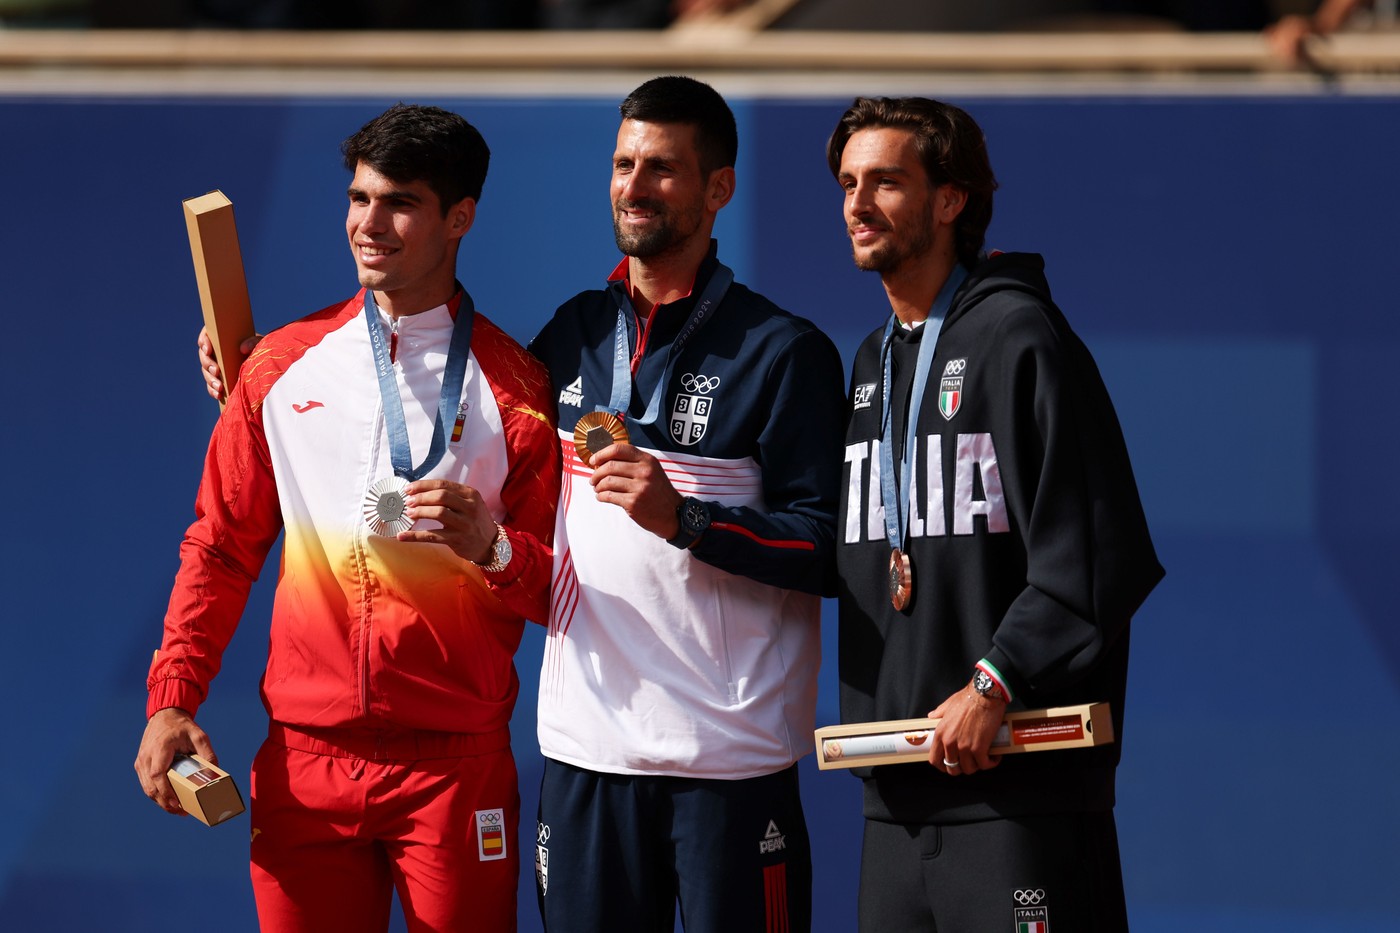 Silver Medalist Carlos Alcaraz of Spain (left), Gold Medalist Novak Djokovic of Serbia (centre) and Bronze Medalist Lorenzo Musetti (right)
Paris 2024 Olympic Games, Day Nine, Paris, France - 04 Aug 2024,Image: 895908943, License: Rights-managed, Restrictions: , Model Release: no